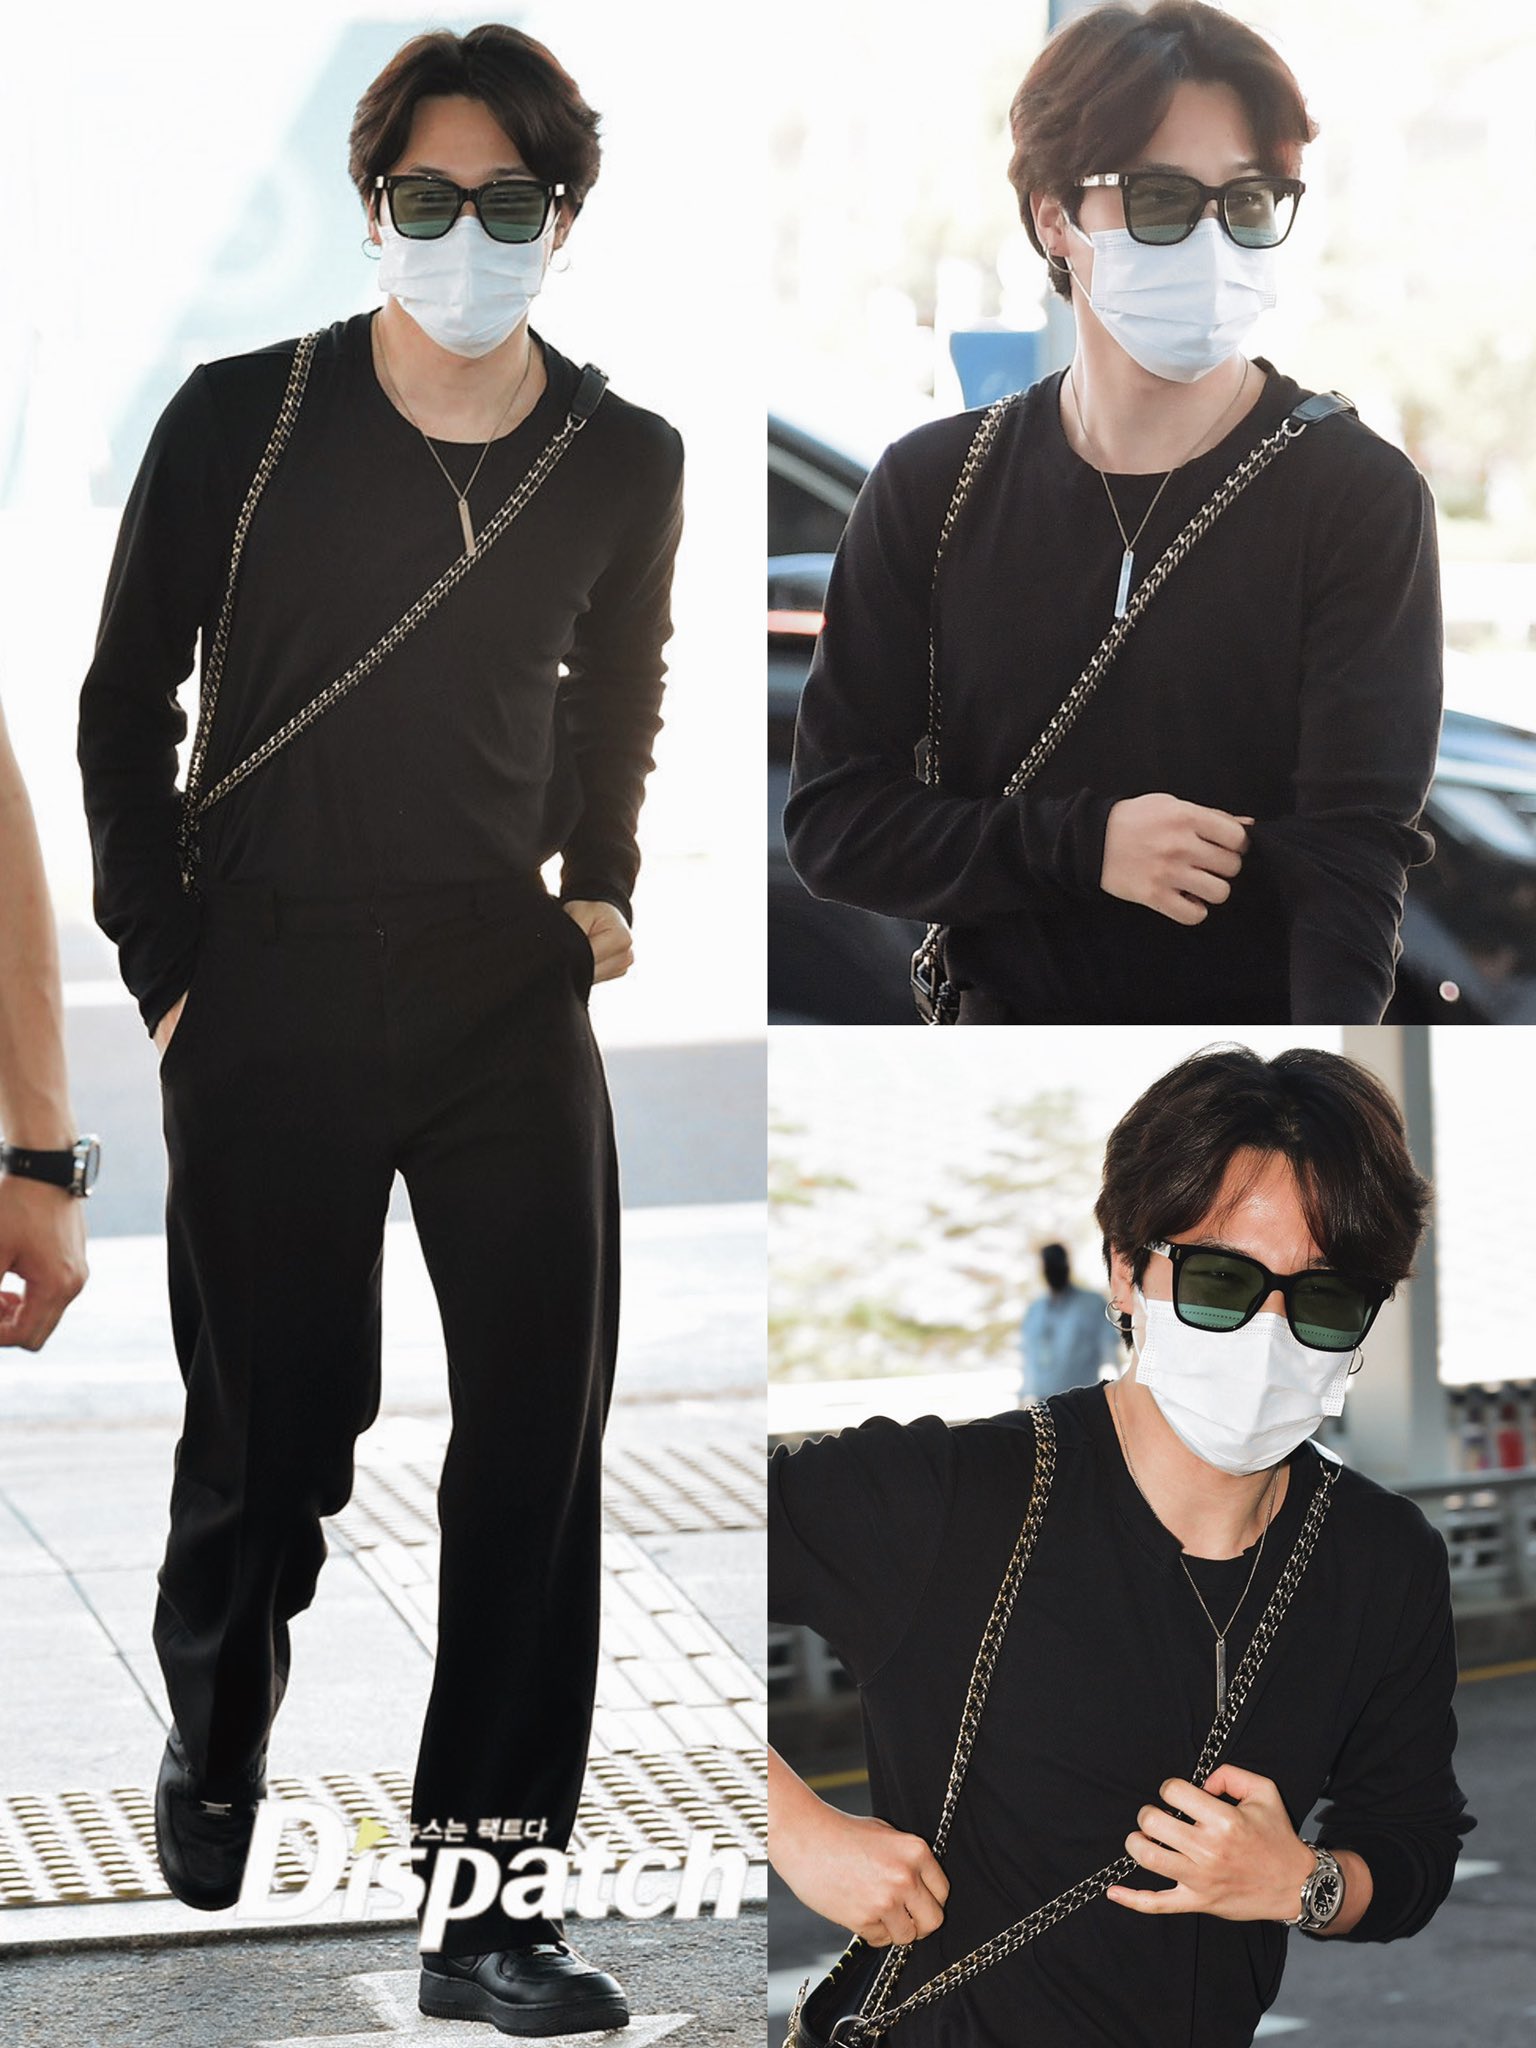 BTS Jimin airport fashion from March 28, 2022 : Louis Vuitton jacket and  more - THEKRAD